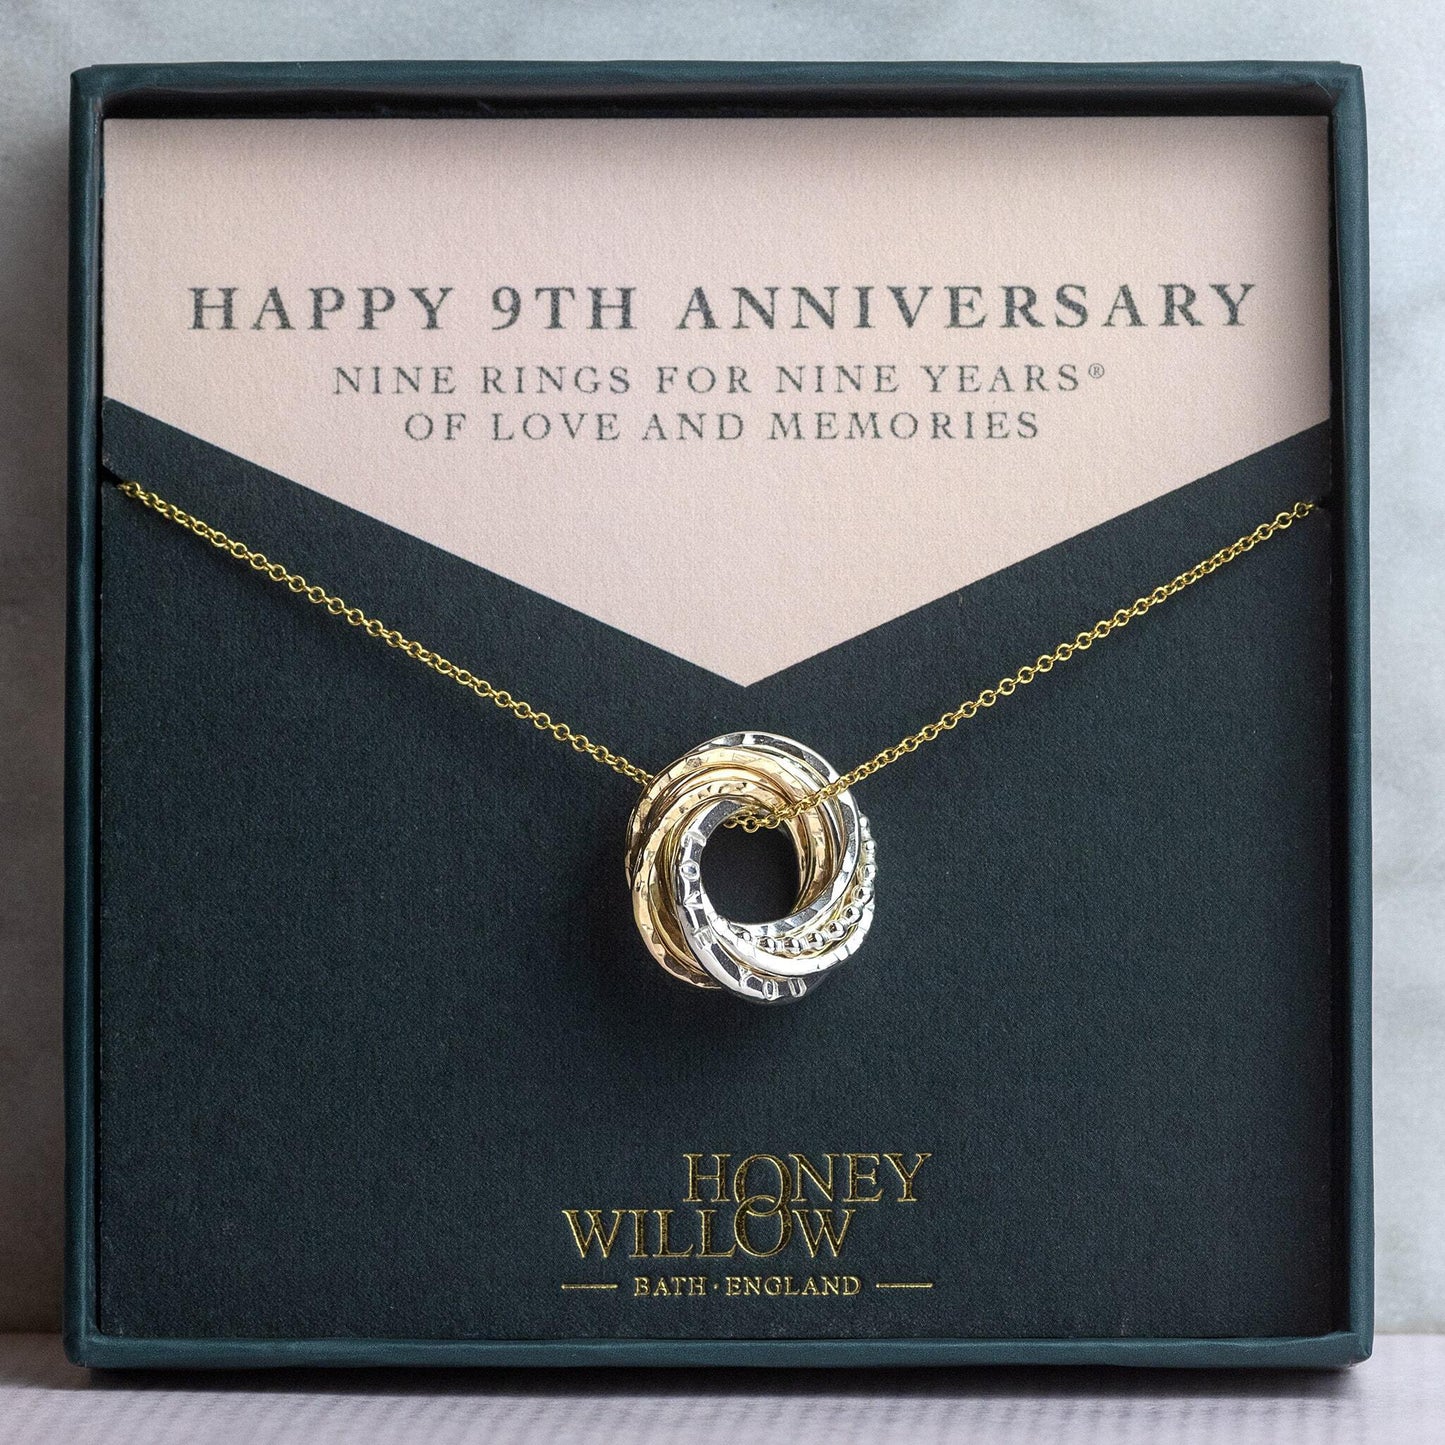 Personalised 9th Anniversary Necklace - Hand-Stamped - The Original 9 Rings for 9 Years Necklace - Petite Silver & Gold